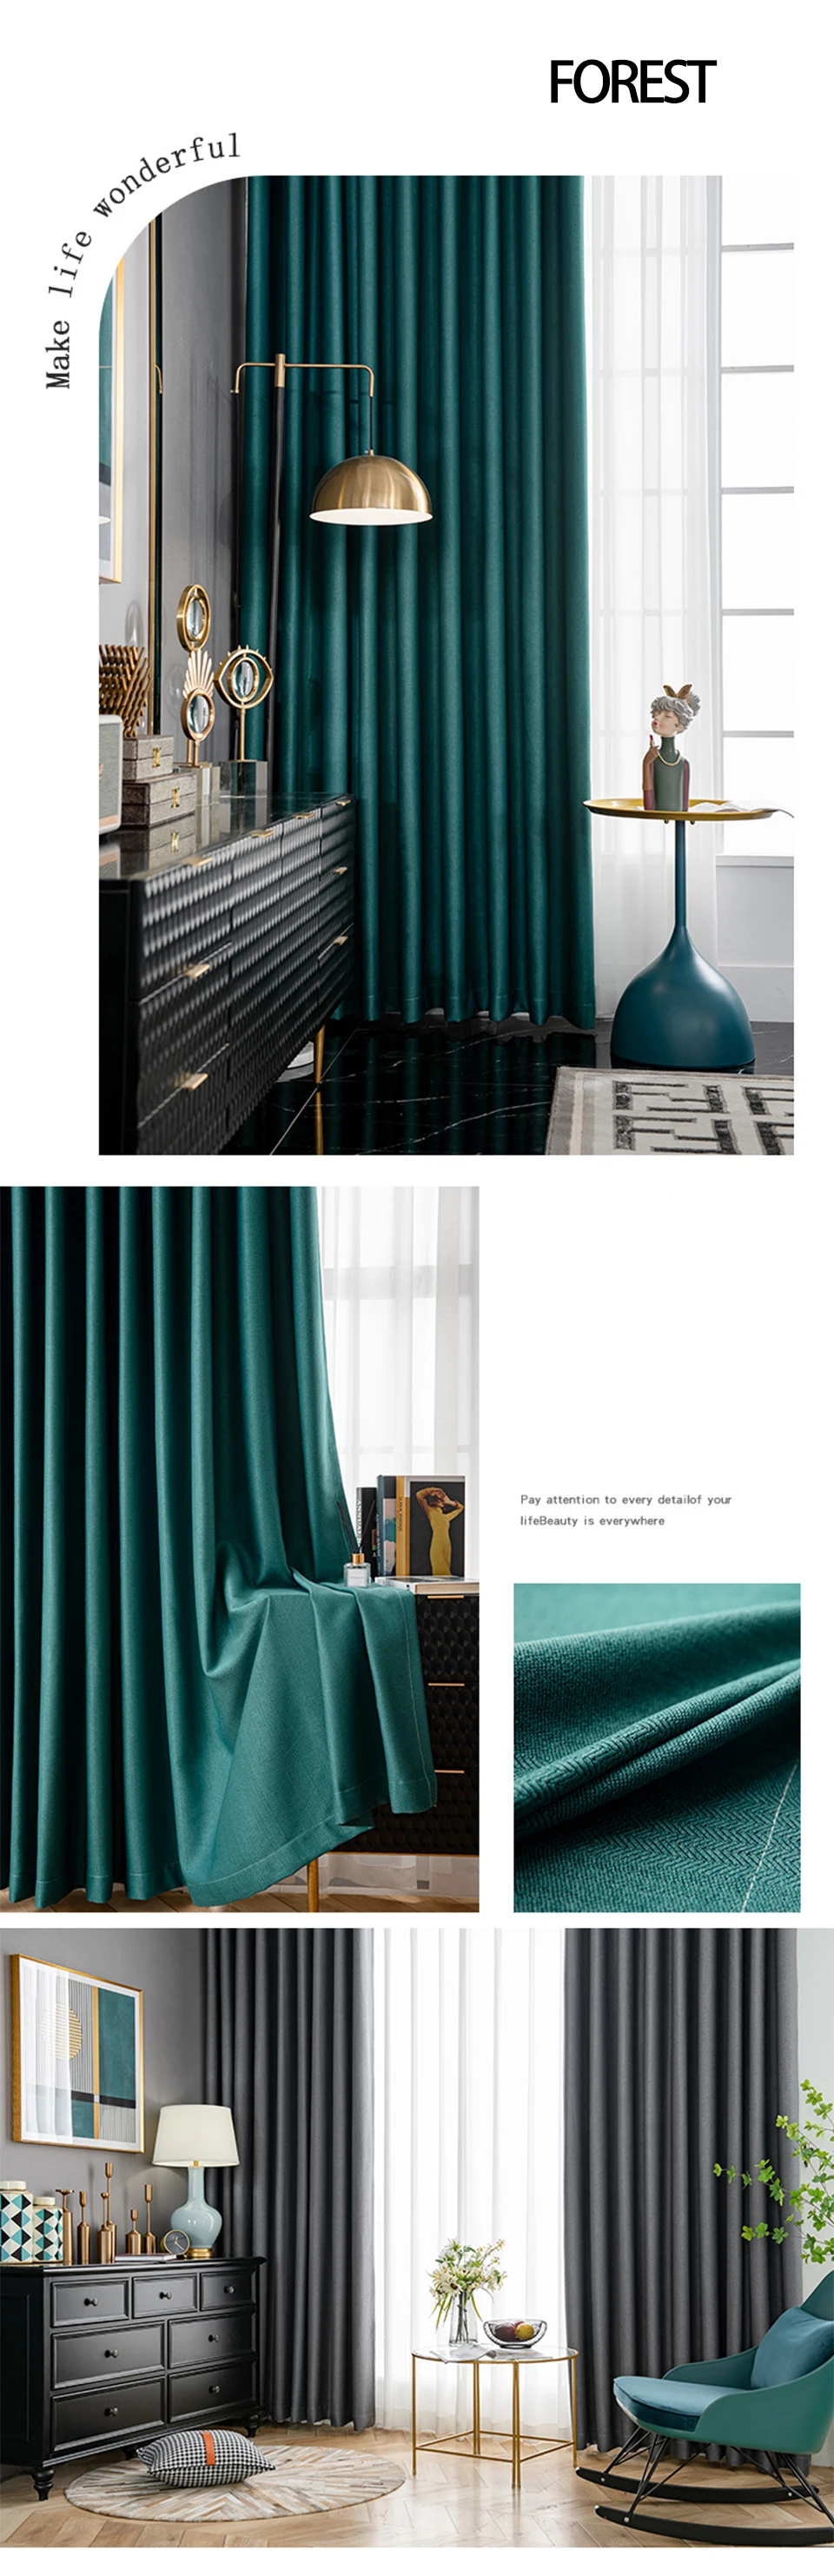 YCENTRE Modern Blackout Curtains Window For Living Room Bedroom High Shading Thick Blinds Drapes Door